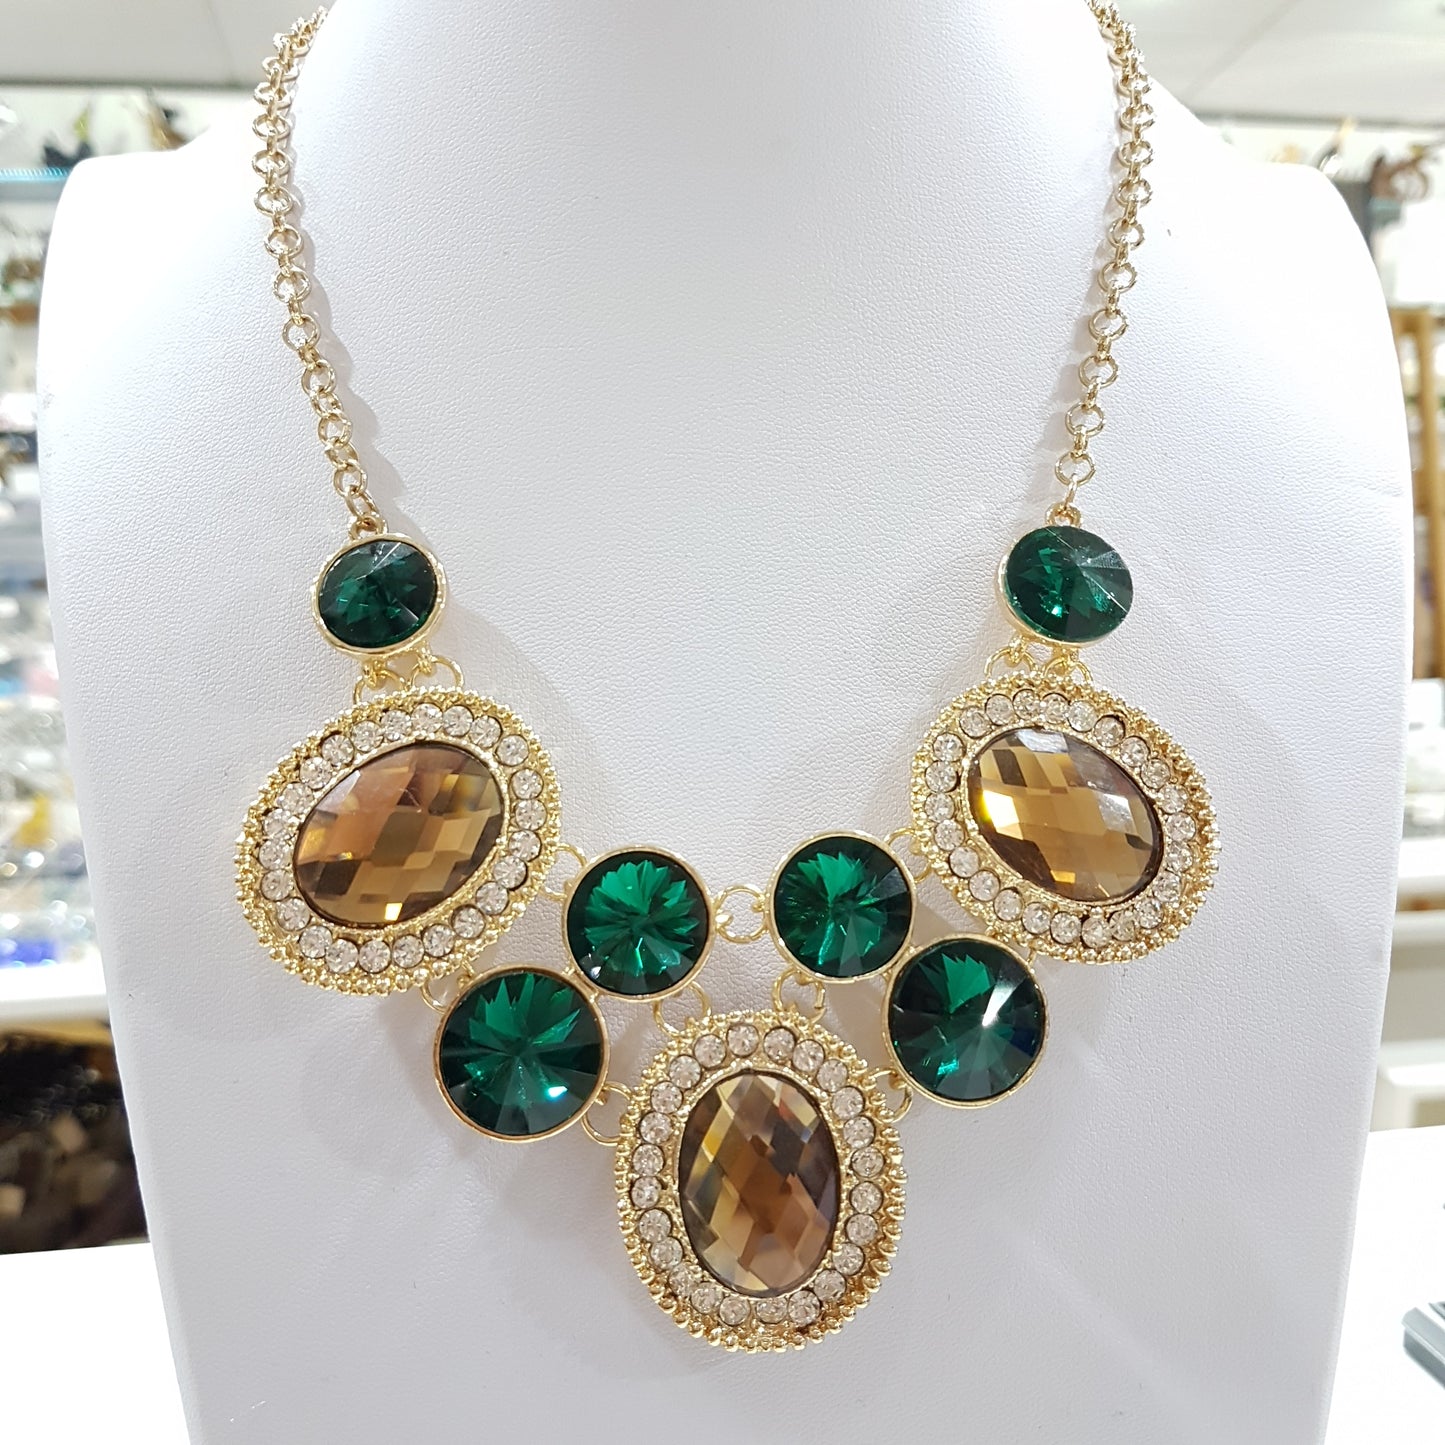 Gold and Green Statement Necklace